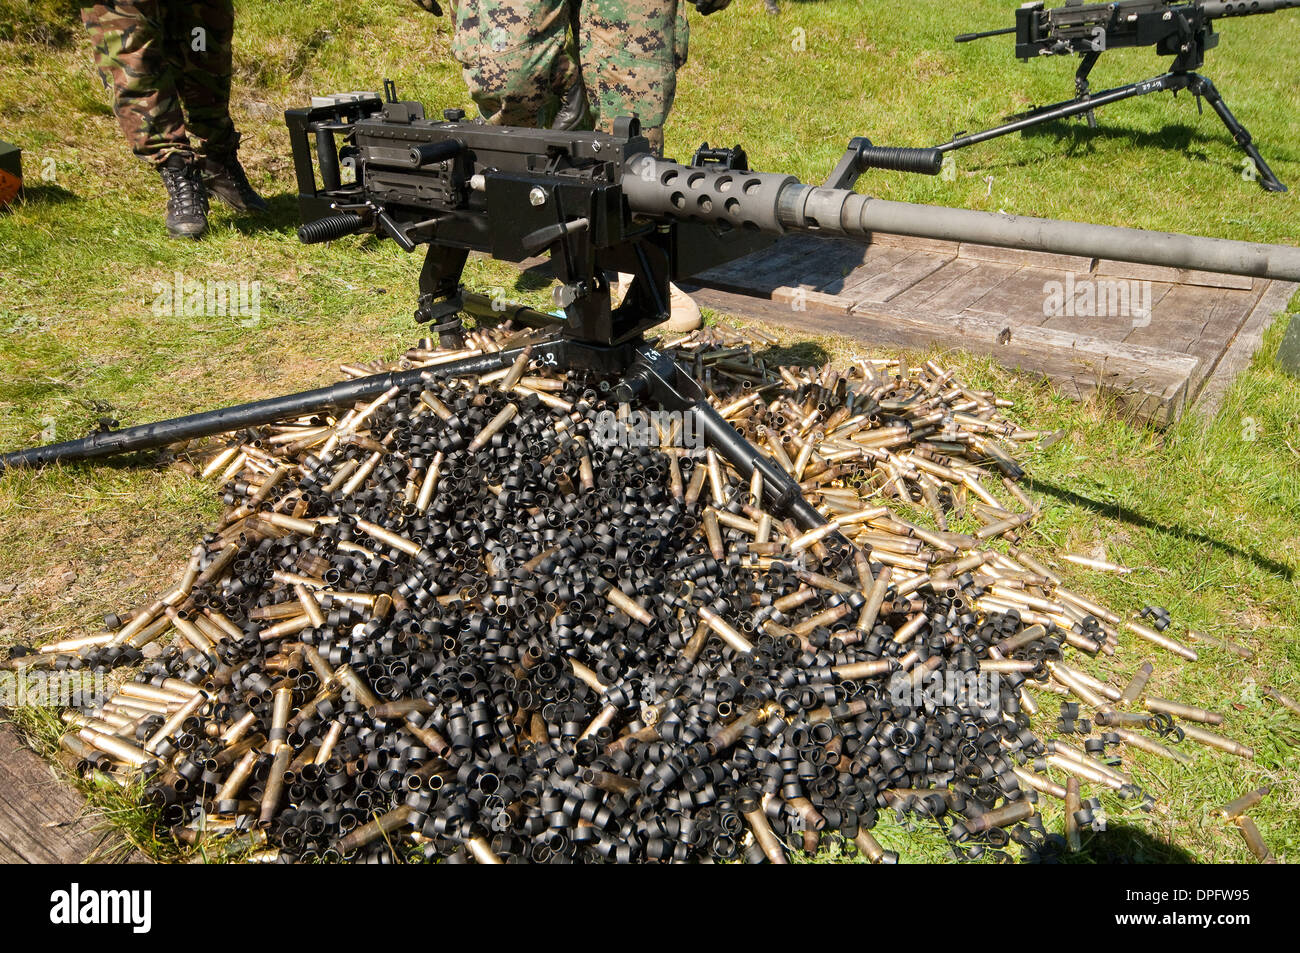 pile of empty bluet casses,, bullets ,bomb, rockets,missiles, shells ,ammo boxes, rounds,he explosive, British army,machine gun Stock Photo